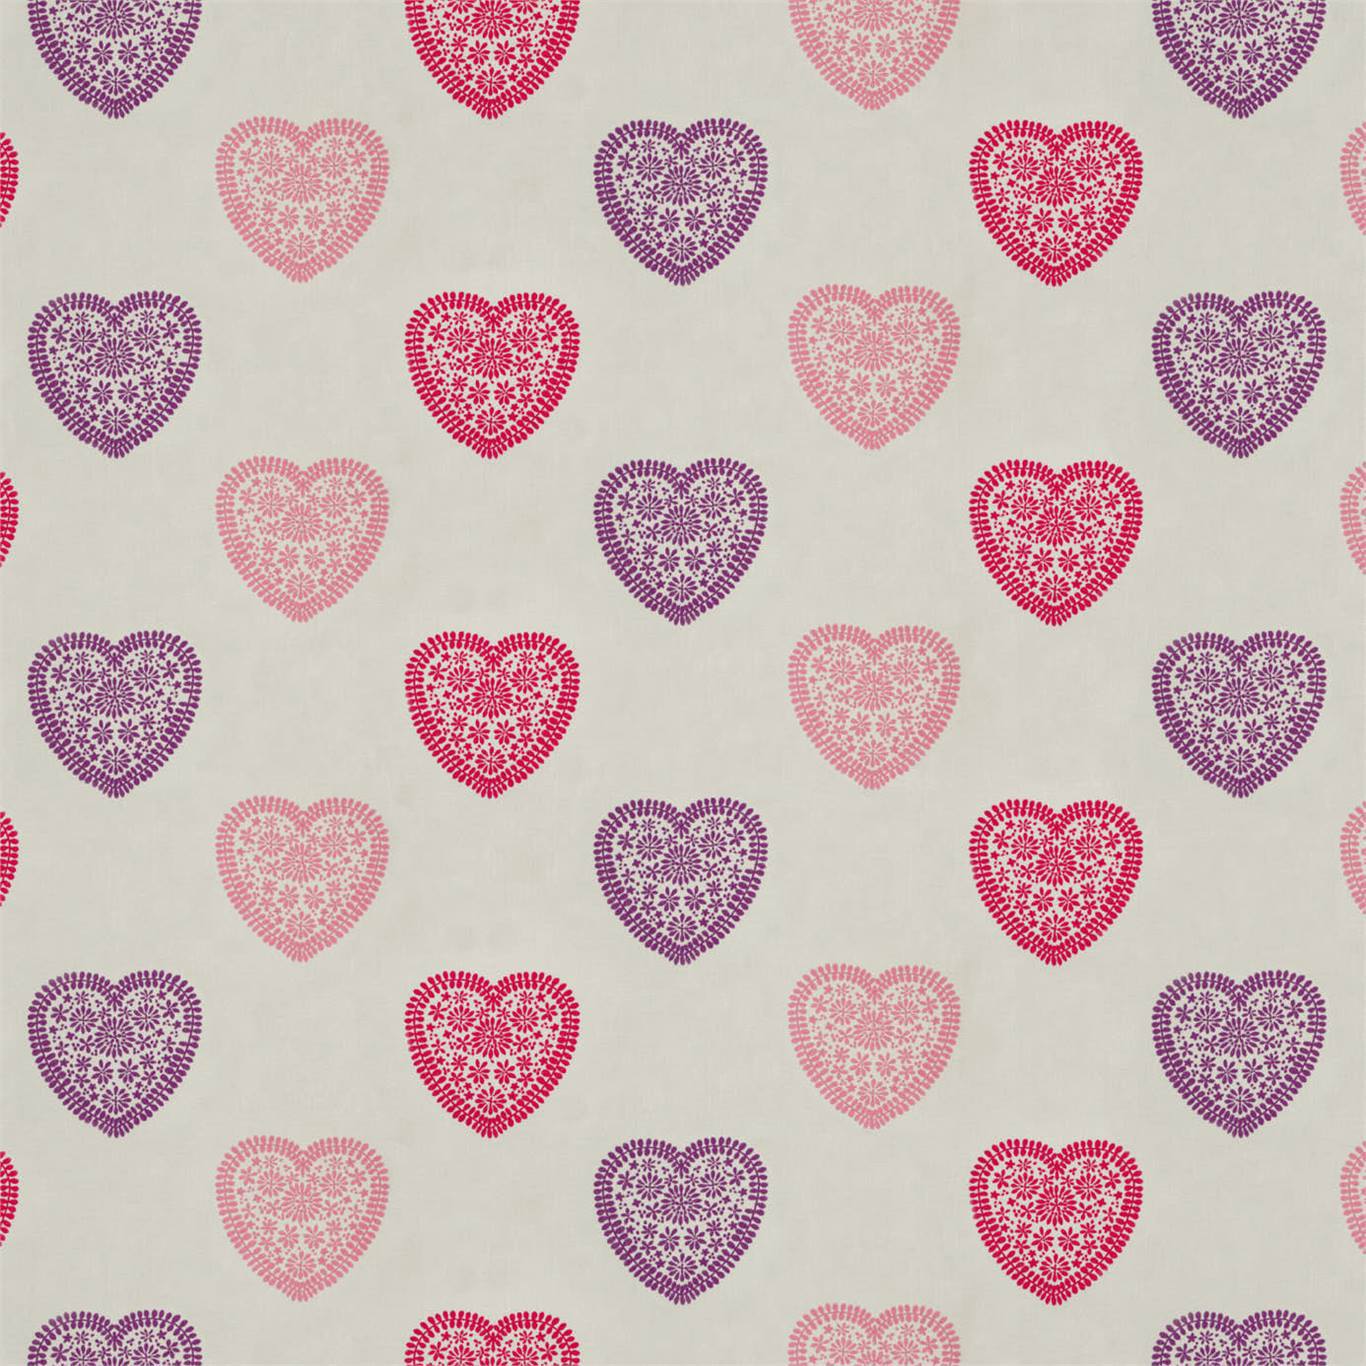 All About Me 130755 Sweet Heart Fabric by Harlequin - HLTF133571 - Pink/Purple